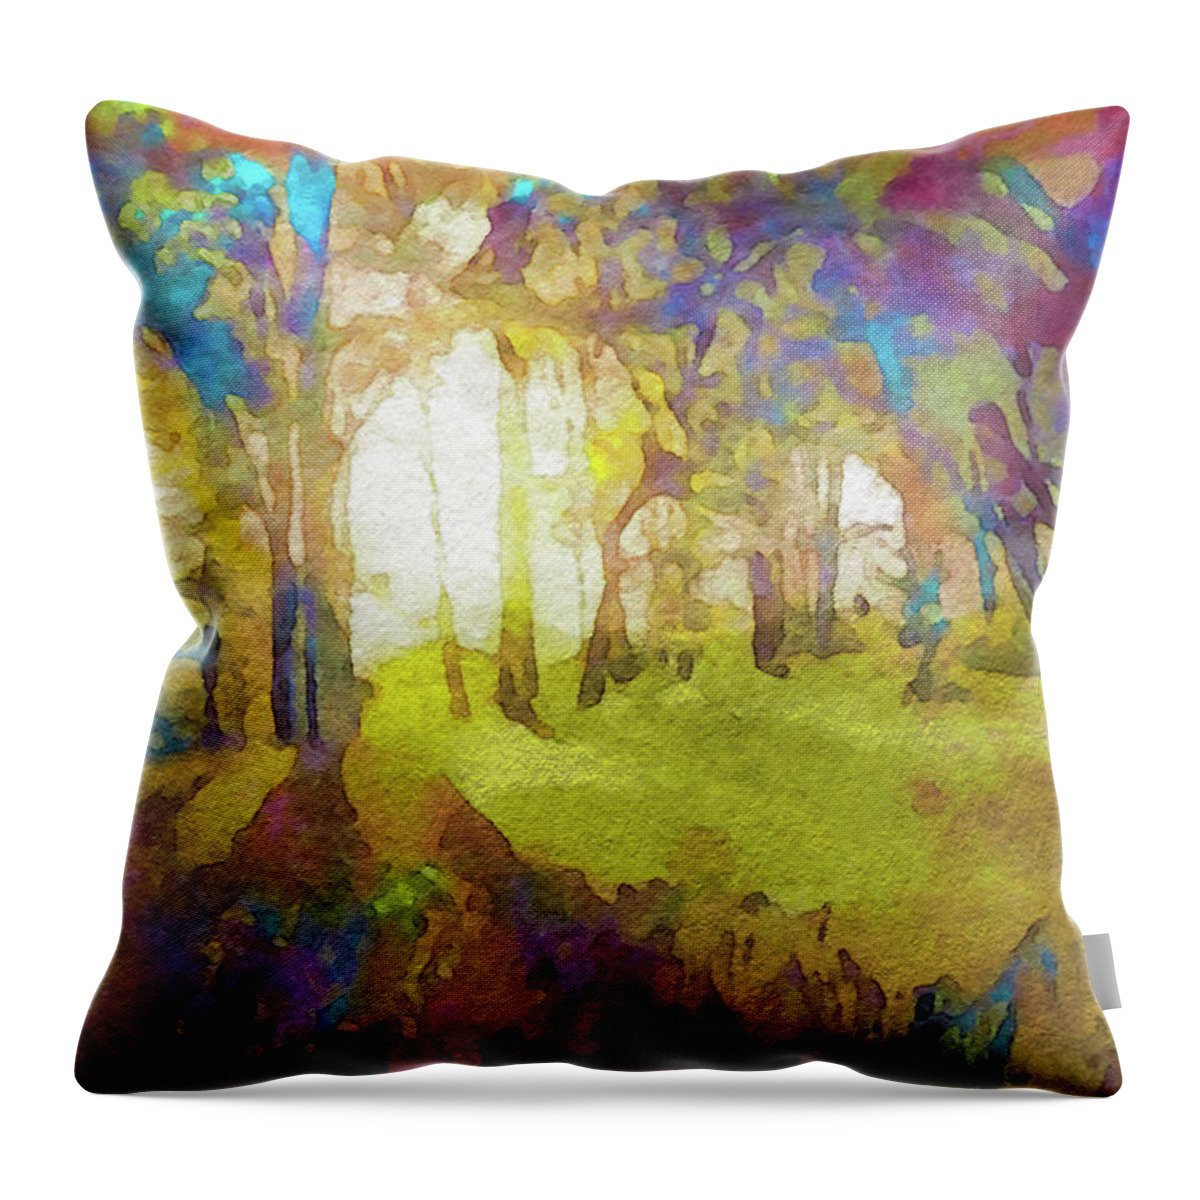 Prismatic Forest Throw Pillow featuring the painting Prismatic Forest by Susan Maxwell Schmidt